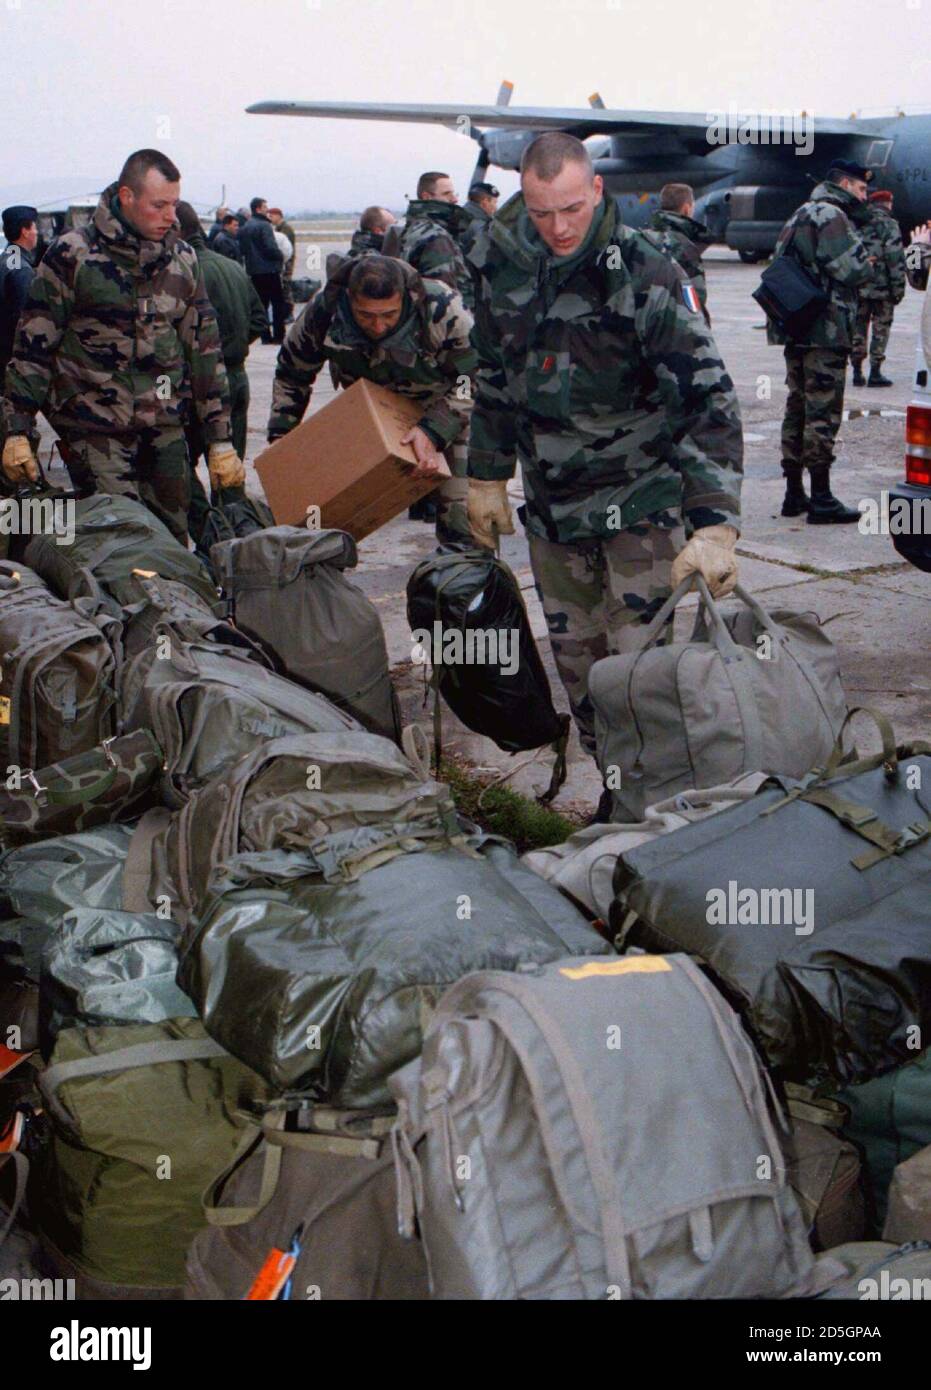 French NATO soldiers collect their belongings piled up on the runway following the arrival of some 40 French troops, members of the NATO extraction force at Skopje airport December 6. The NATO alliance on Saturday announced the imminent deployment to Macedonia of a 1,500-man extraction force to rescue international observers in neighbouring Kosovo in case of emergency. A NATO statement said the mission was in line with United Nations Security Council Resolution 1203 which stipulates arrangements for verifying Yugoslav compliance with U.N. demands to end the Kosovo conflict.  PEK/WS Stock Photo